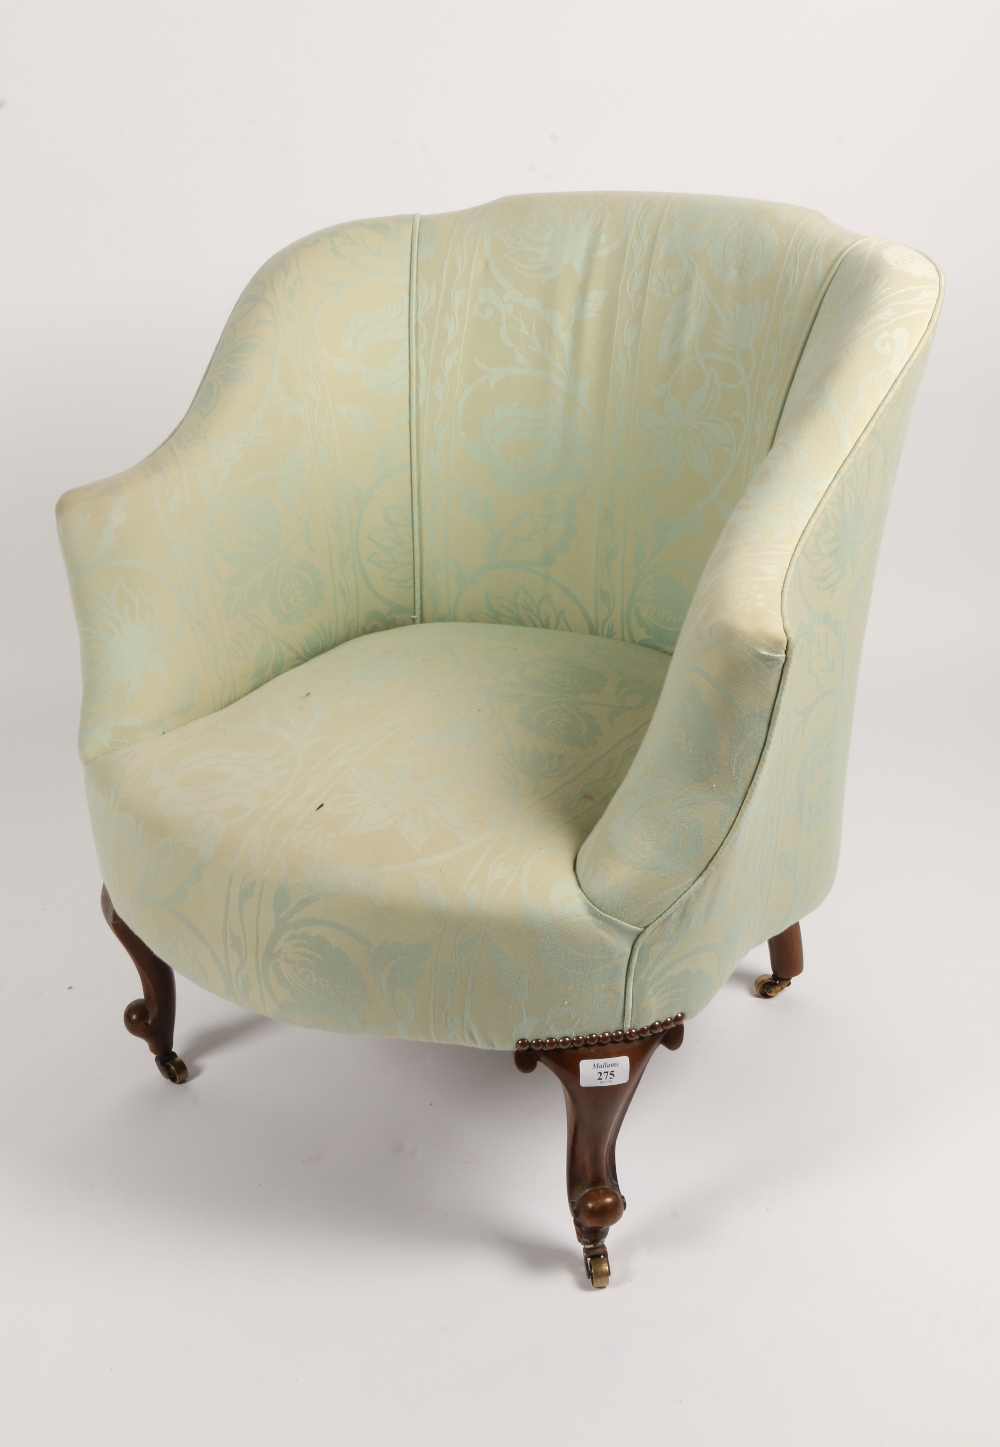 AN EARLY 20TH CENTURY TUB CHAIR with short cabriole front legs terminating in scroll feet and